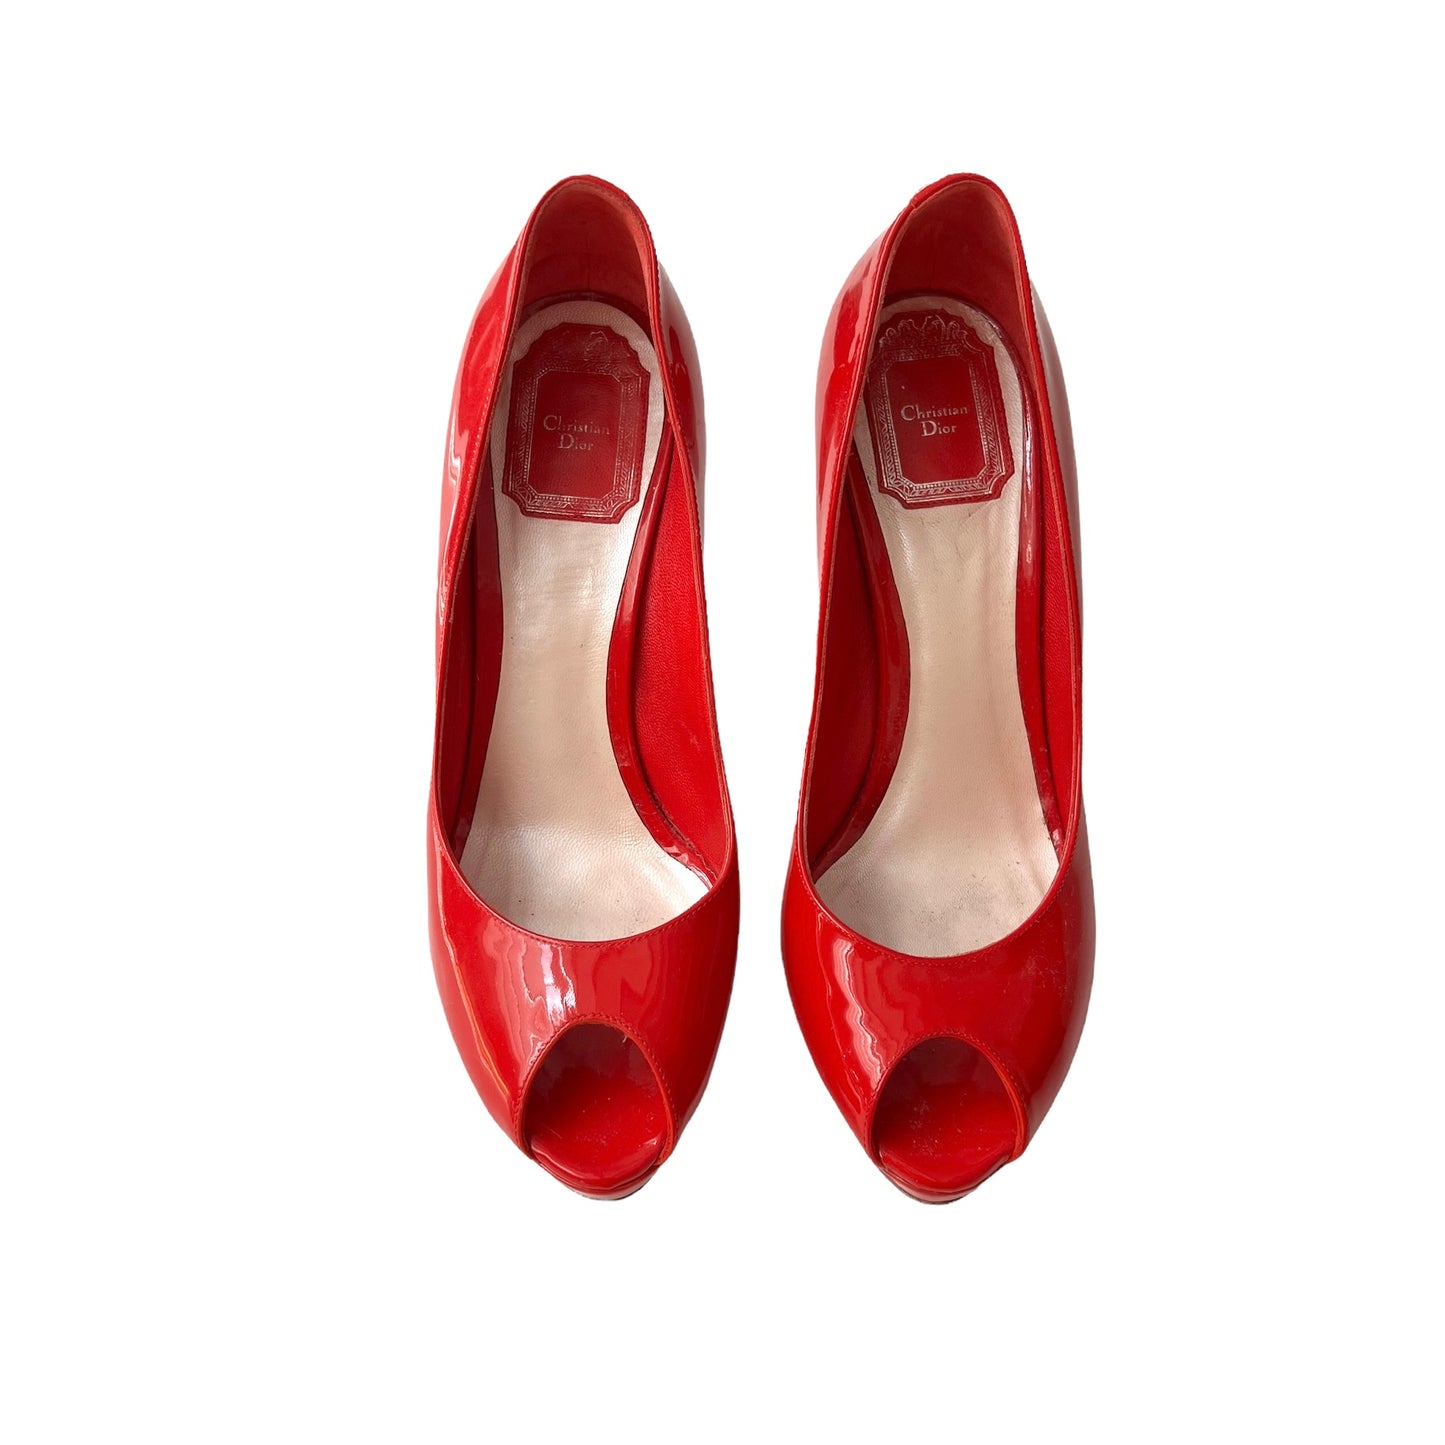 Red Patent Leather Heels - 7.5